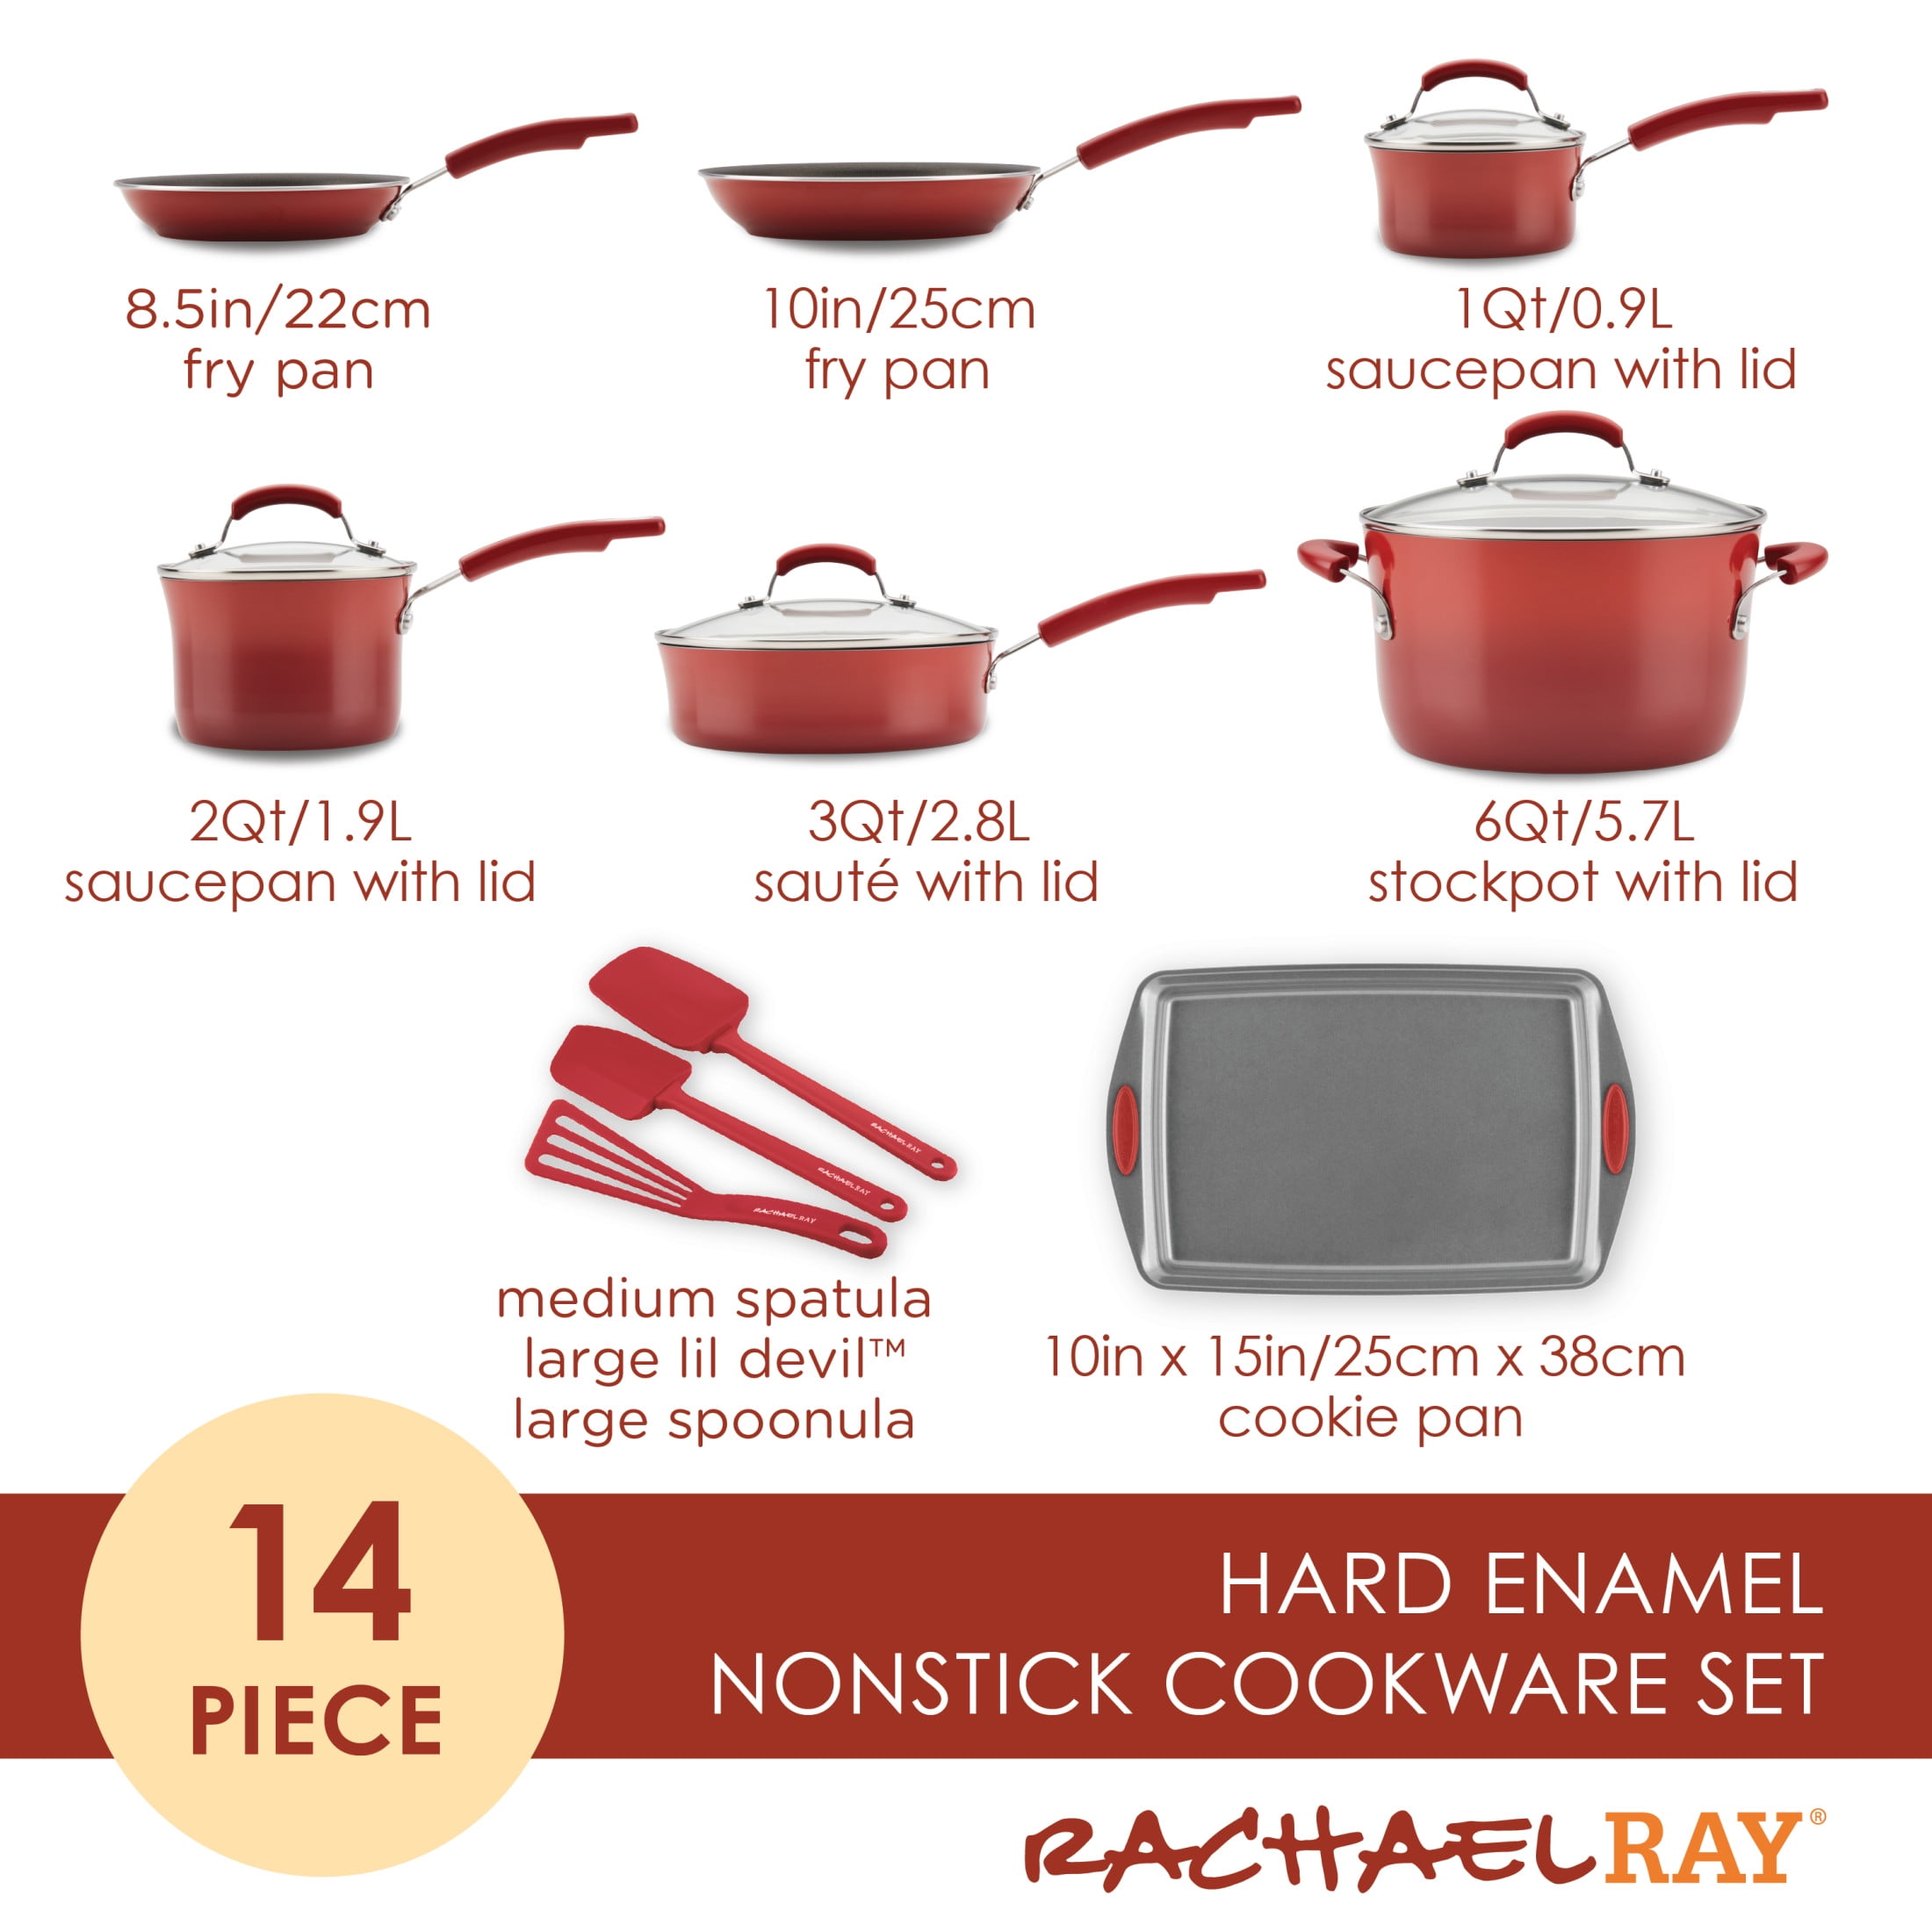 Rachael Ray Brights 14-Piece Nonstick Cookware Set, Red